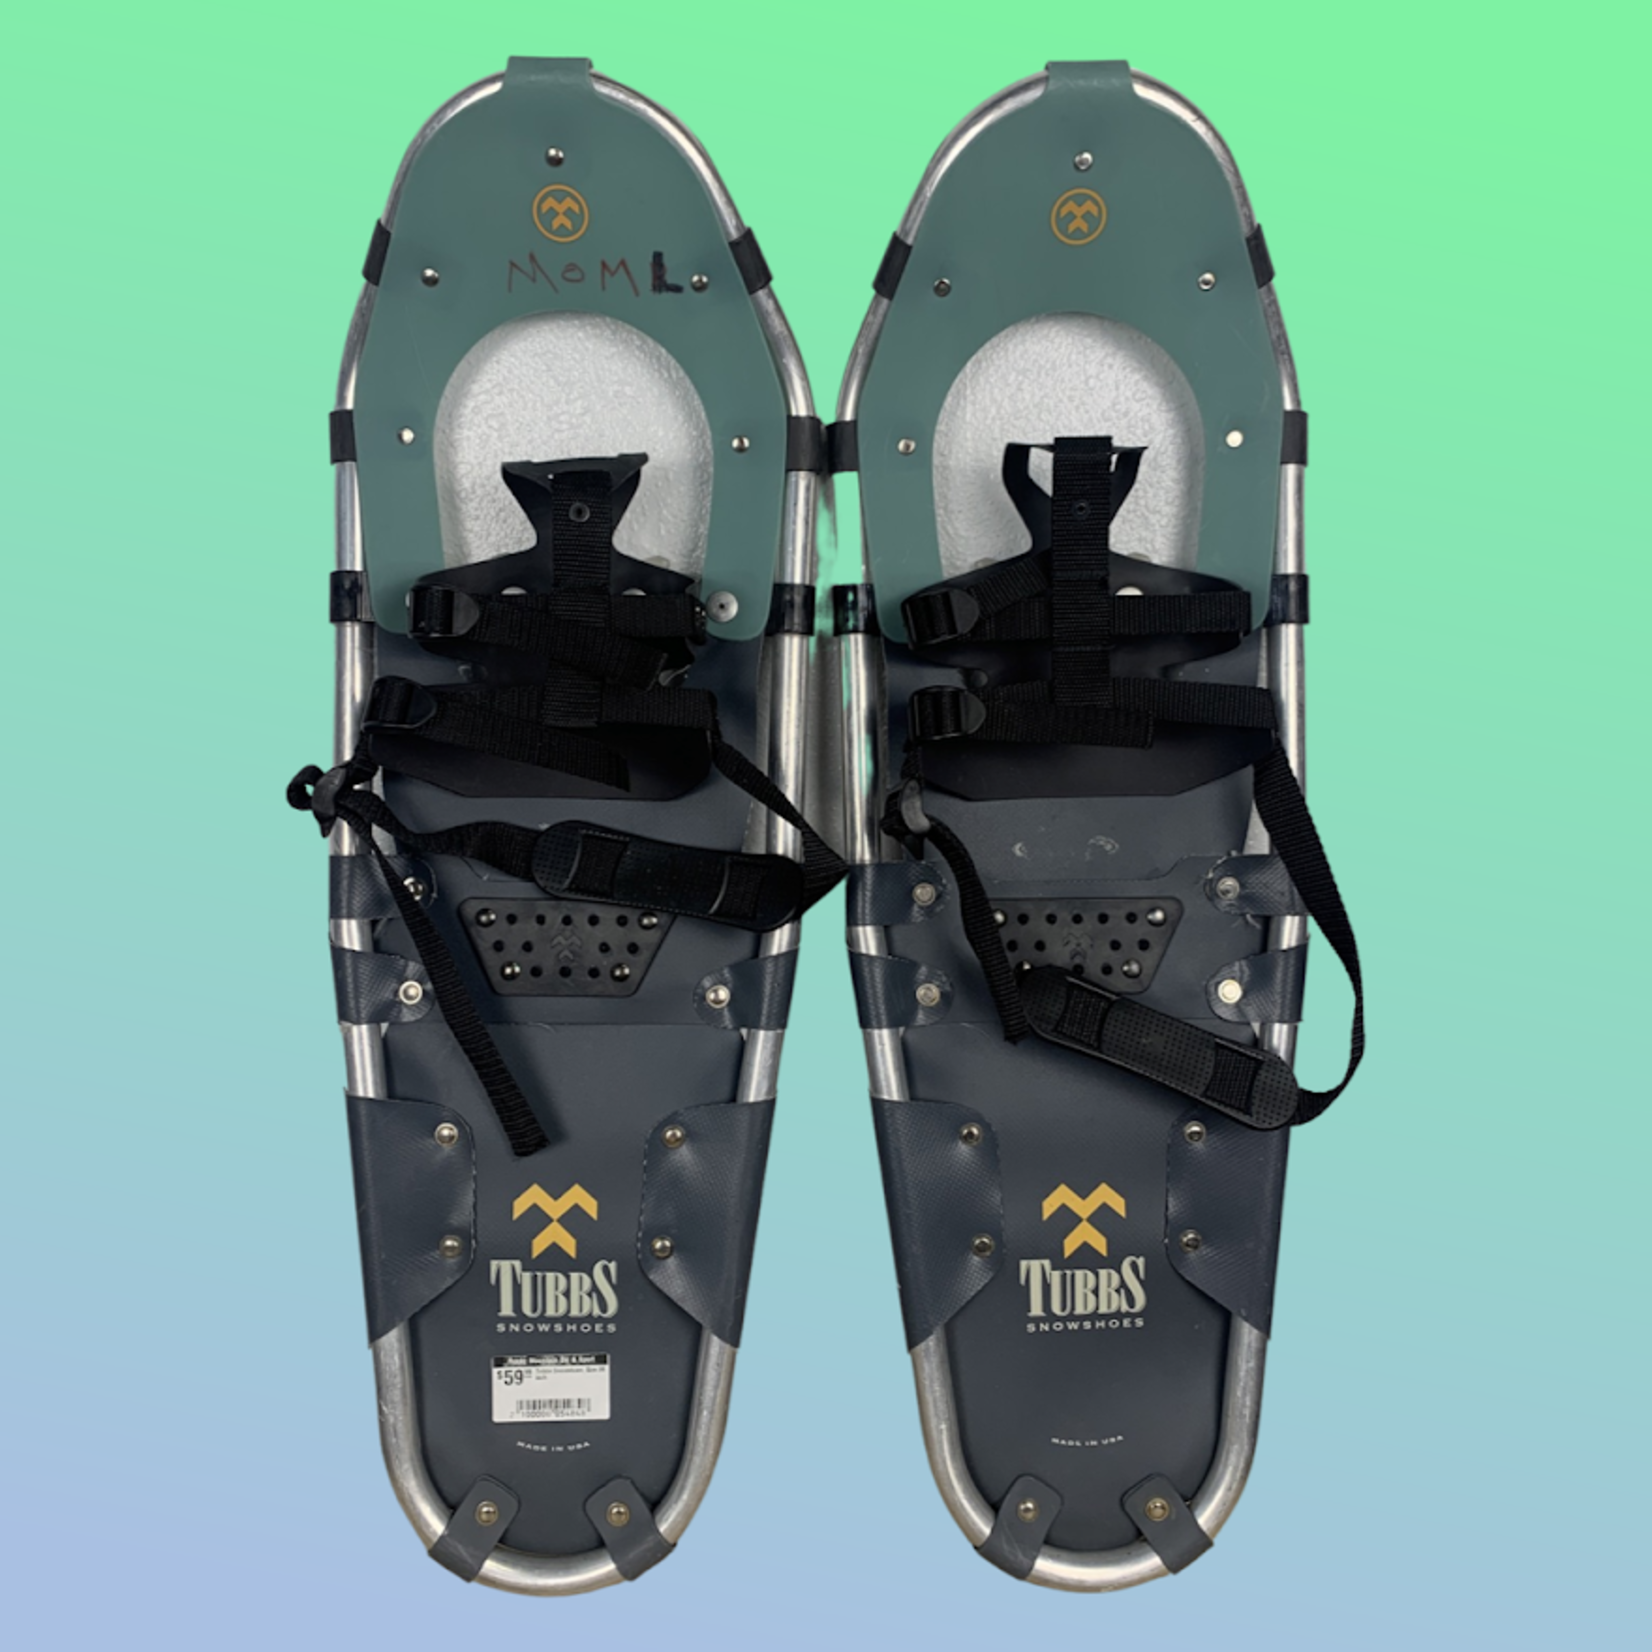 Tubbs Tubbs Snowshoes, Size 28 inch.